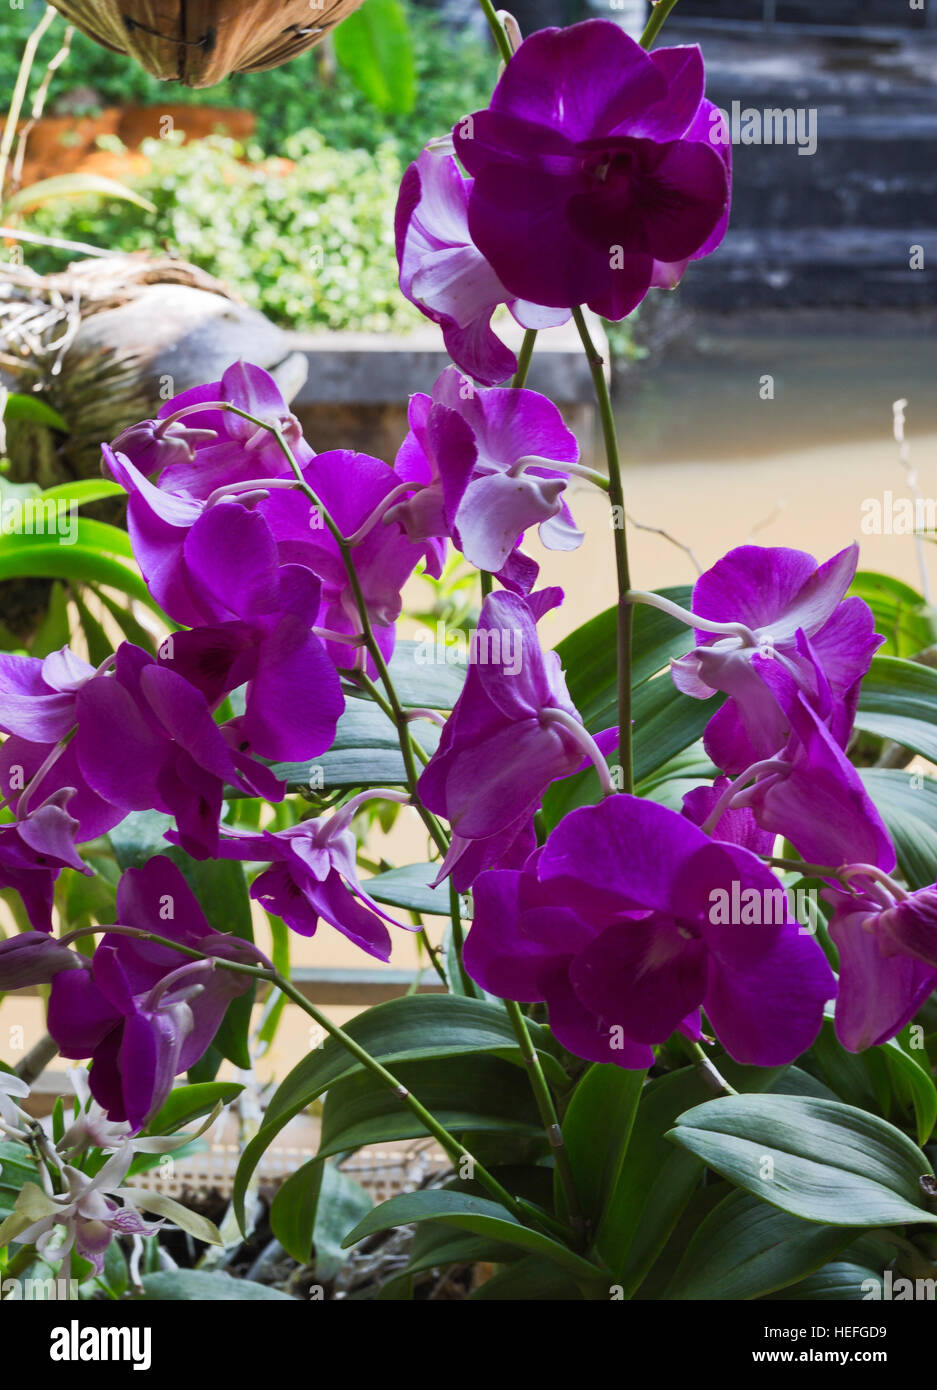 Common Thai purple orchid flower belonging to the Orchidaceae, a diverse and widespread family of flowering plants Stock Photo